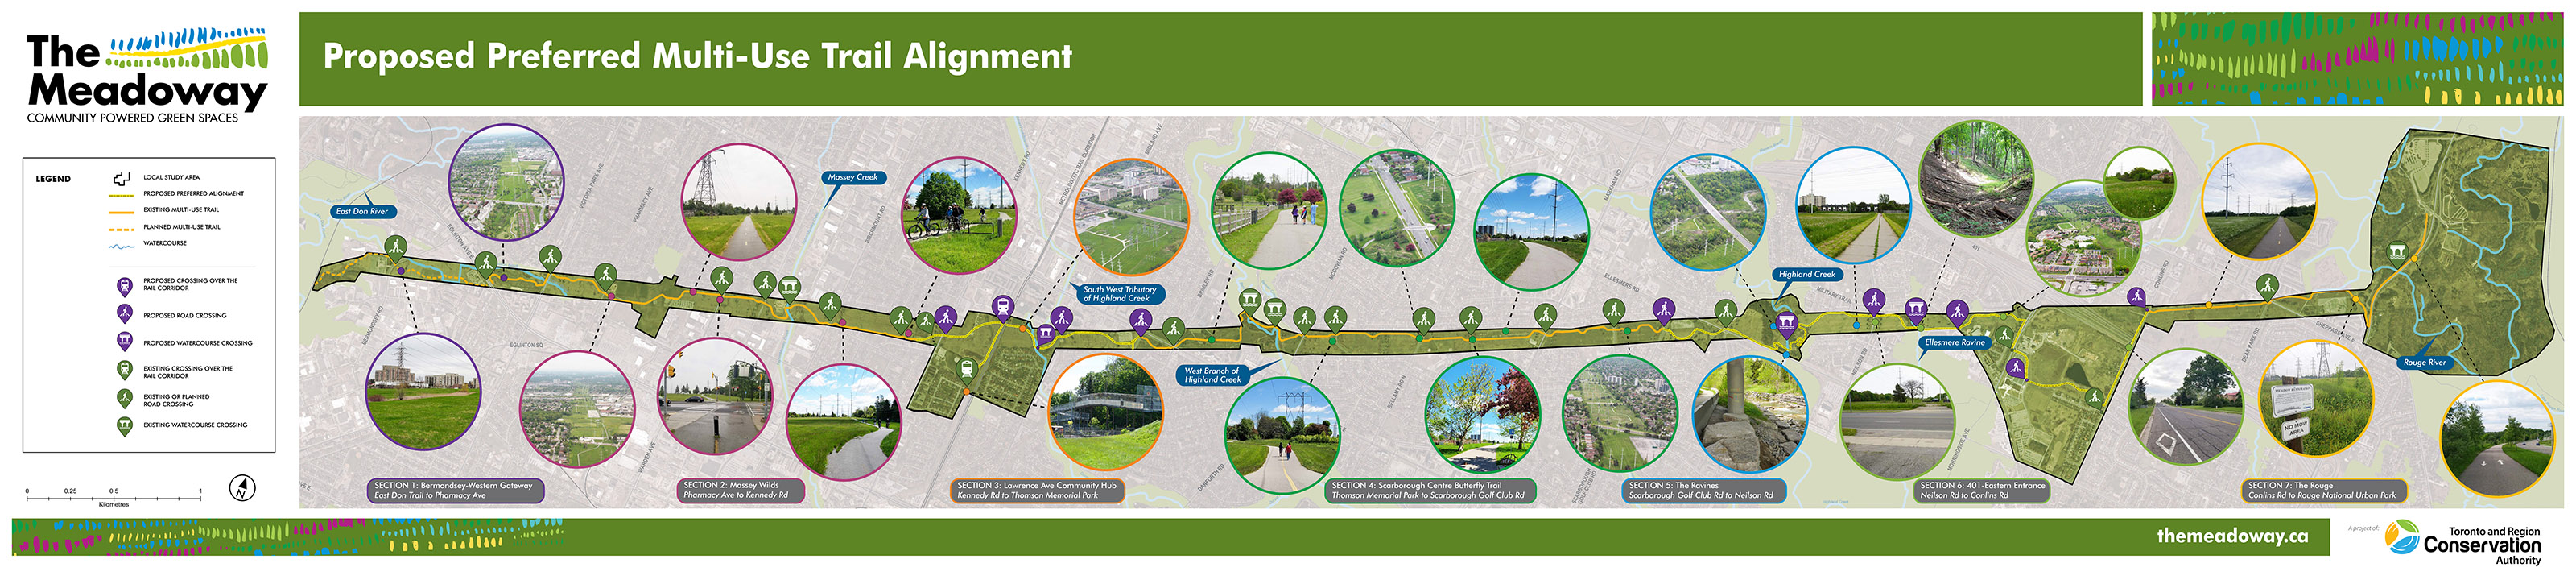 Meadoway proposed preferred trail alignment map